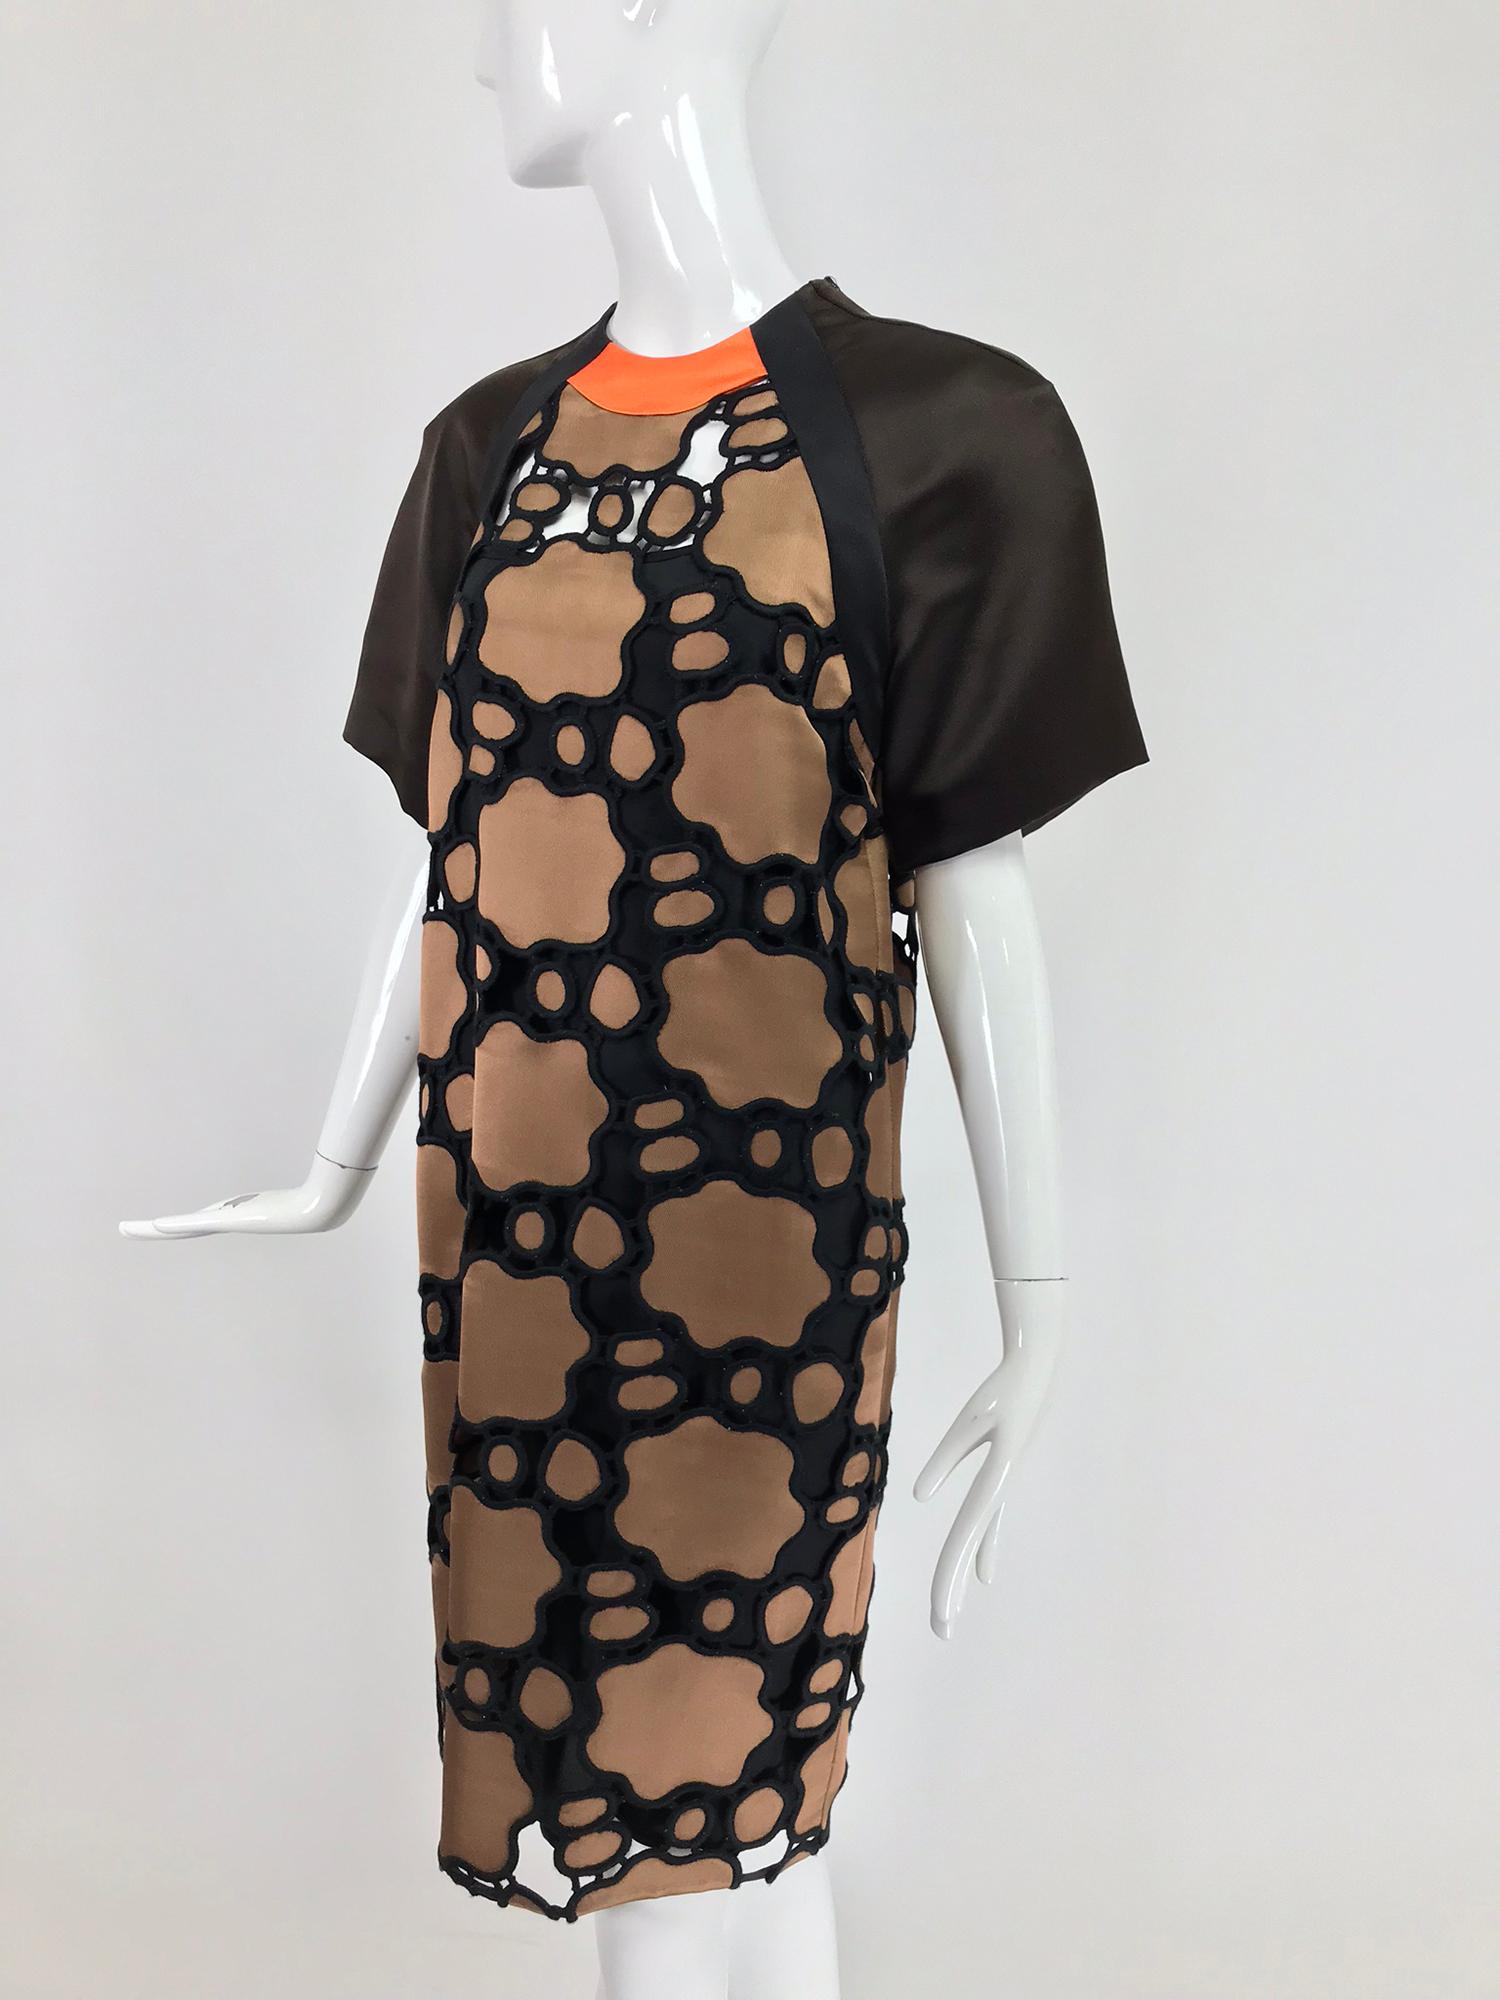 miu miu cut work day dress in brown and black with orange chain pattern. Jewel neck dress with raglan sleeves together with original black silk slip. Pull on dress has wide brown silk twill sleeves that are banded in black twill and an orange band